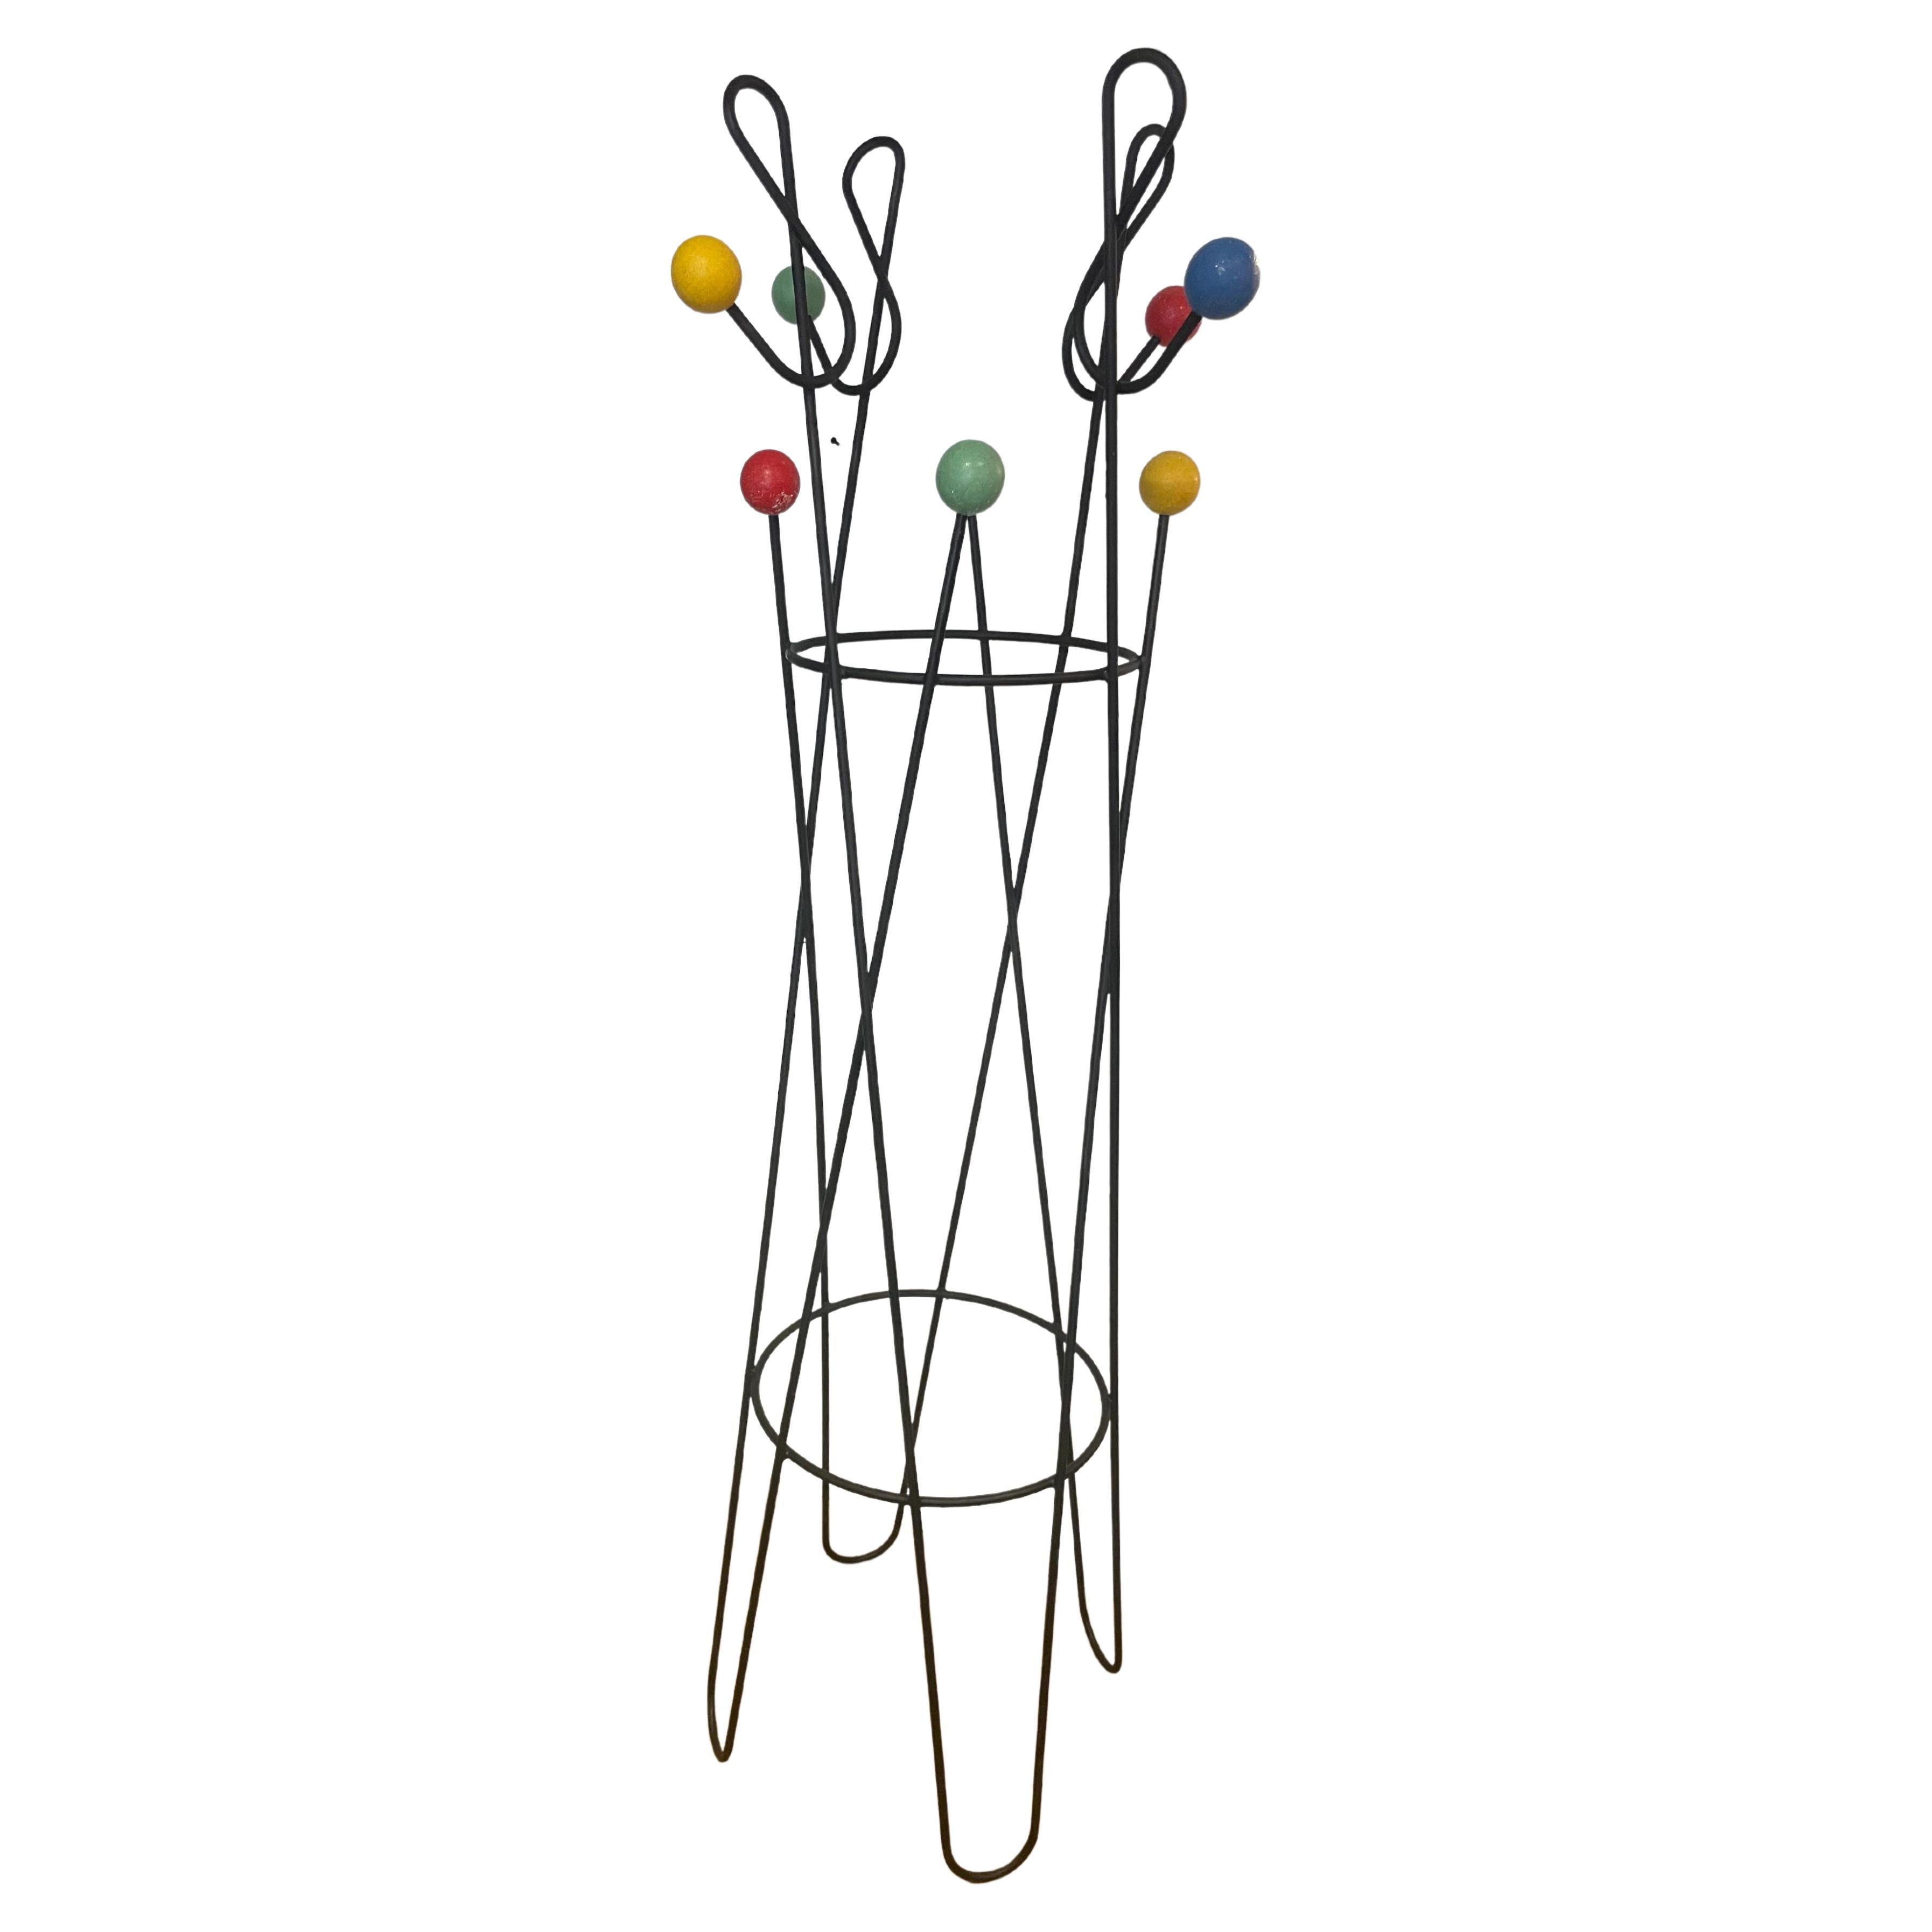 Sourced by Martyn Lawrence Bullard at auction in Paris, France
Wrought iron and multicolored coat rack.
Inspired by Scandinavian influence, this coat rack provides whimsy and sophistication to any space.